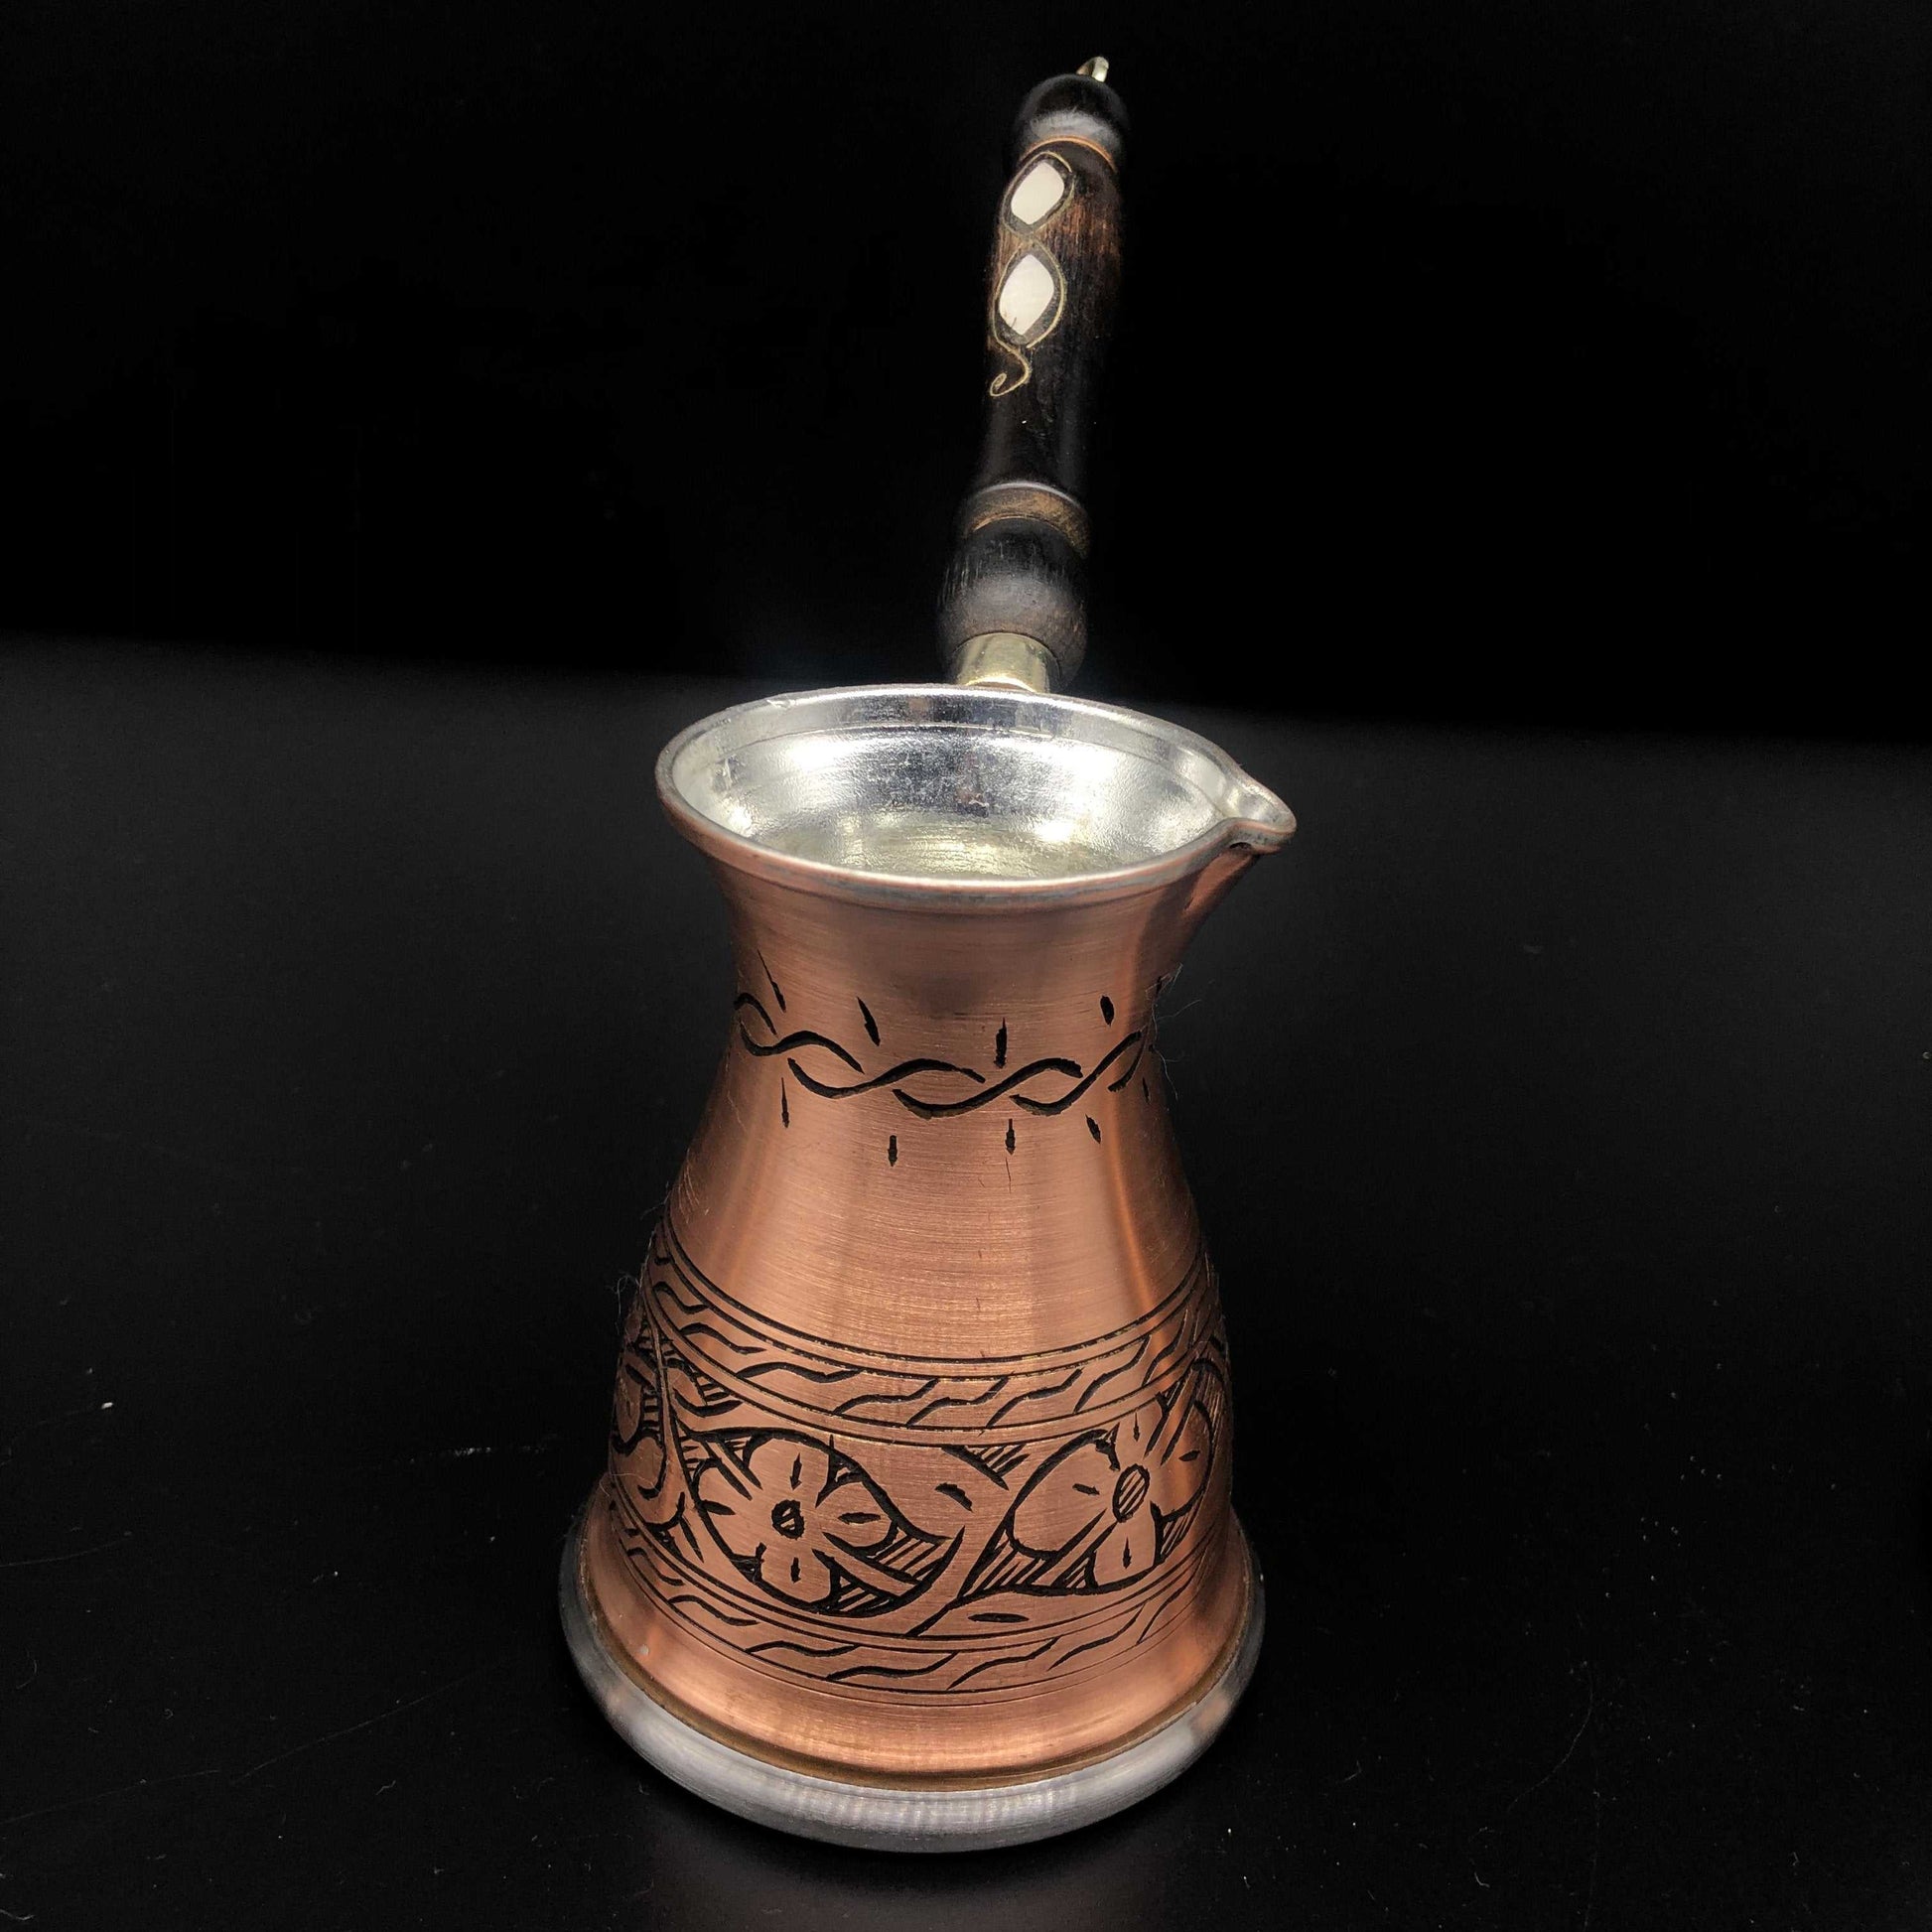 Turkish Cooper Coffee Maker (cezve) thin and long